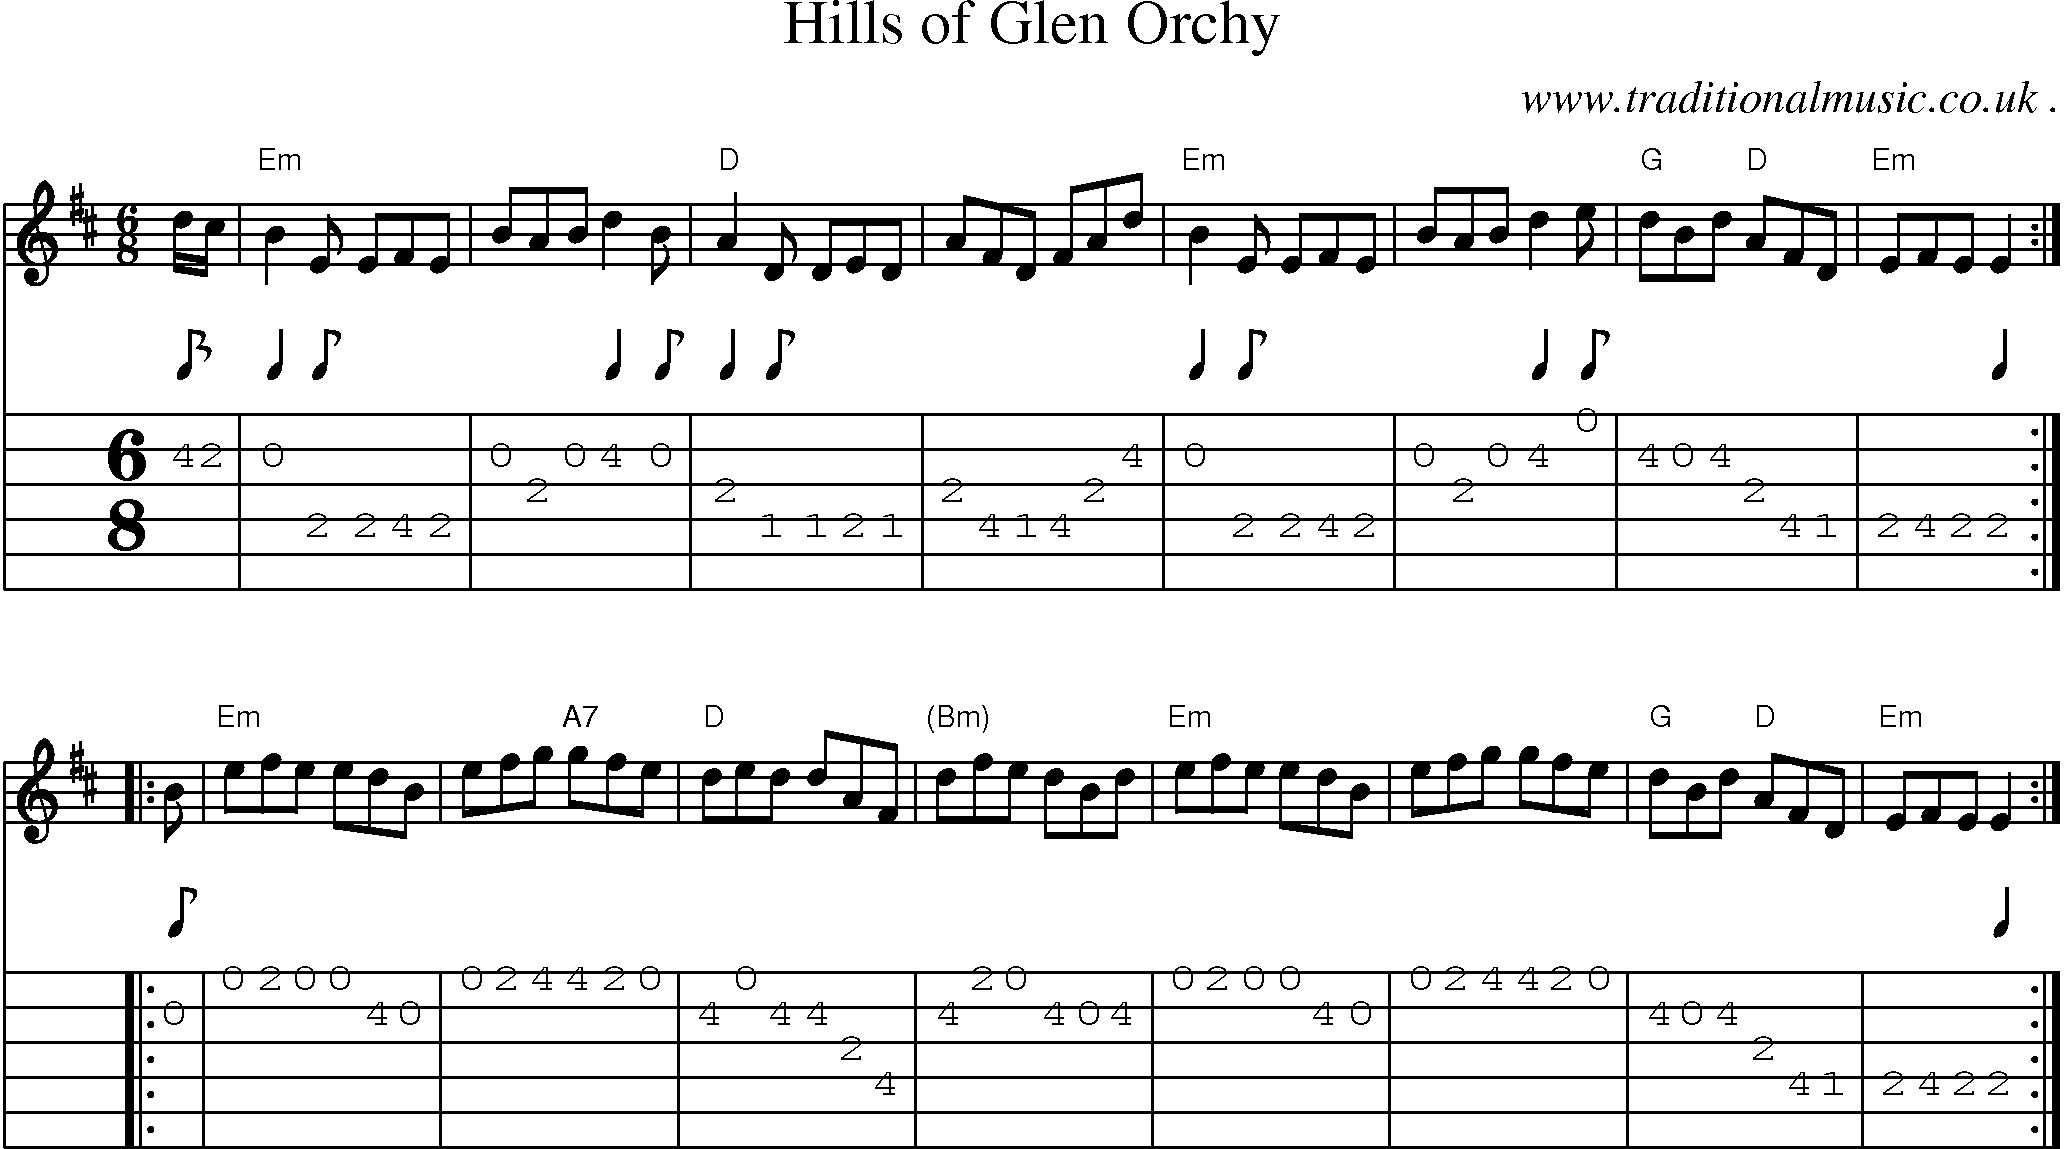 Sheet-music  score, Chords and Guitar Tabs for Hills Of Glen Orchy